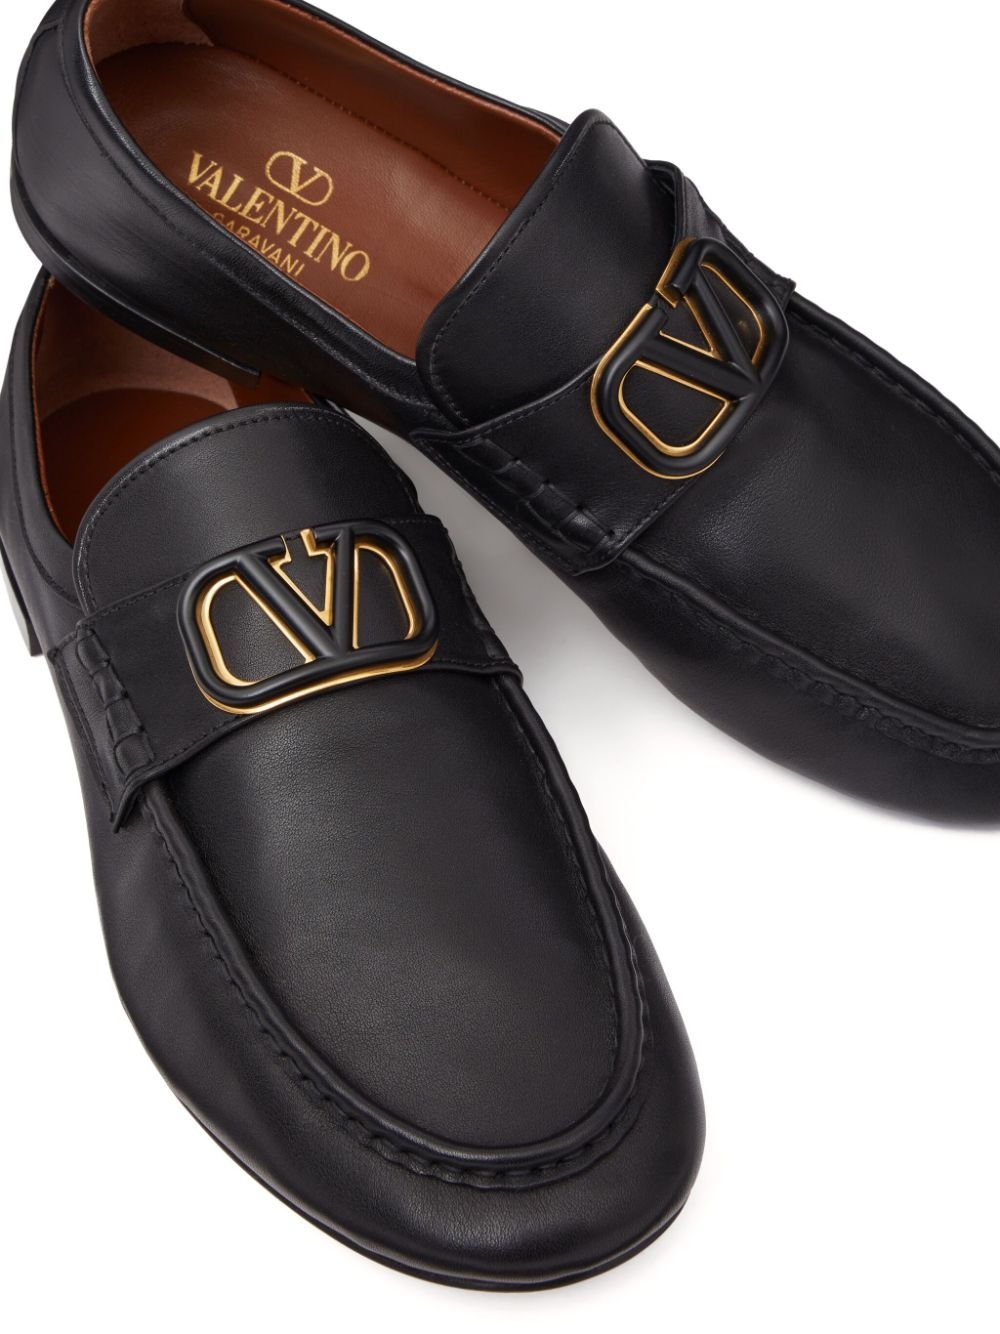 VLogo Signature leather loafers - 5